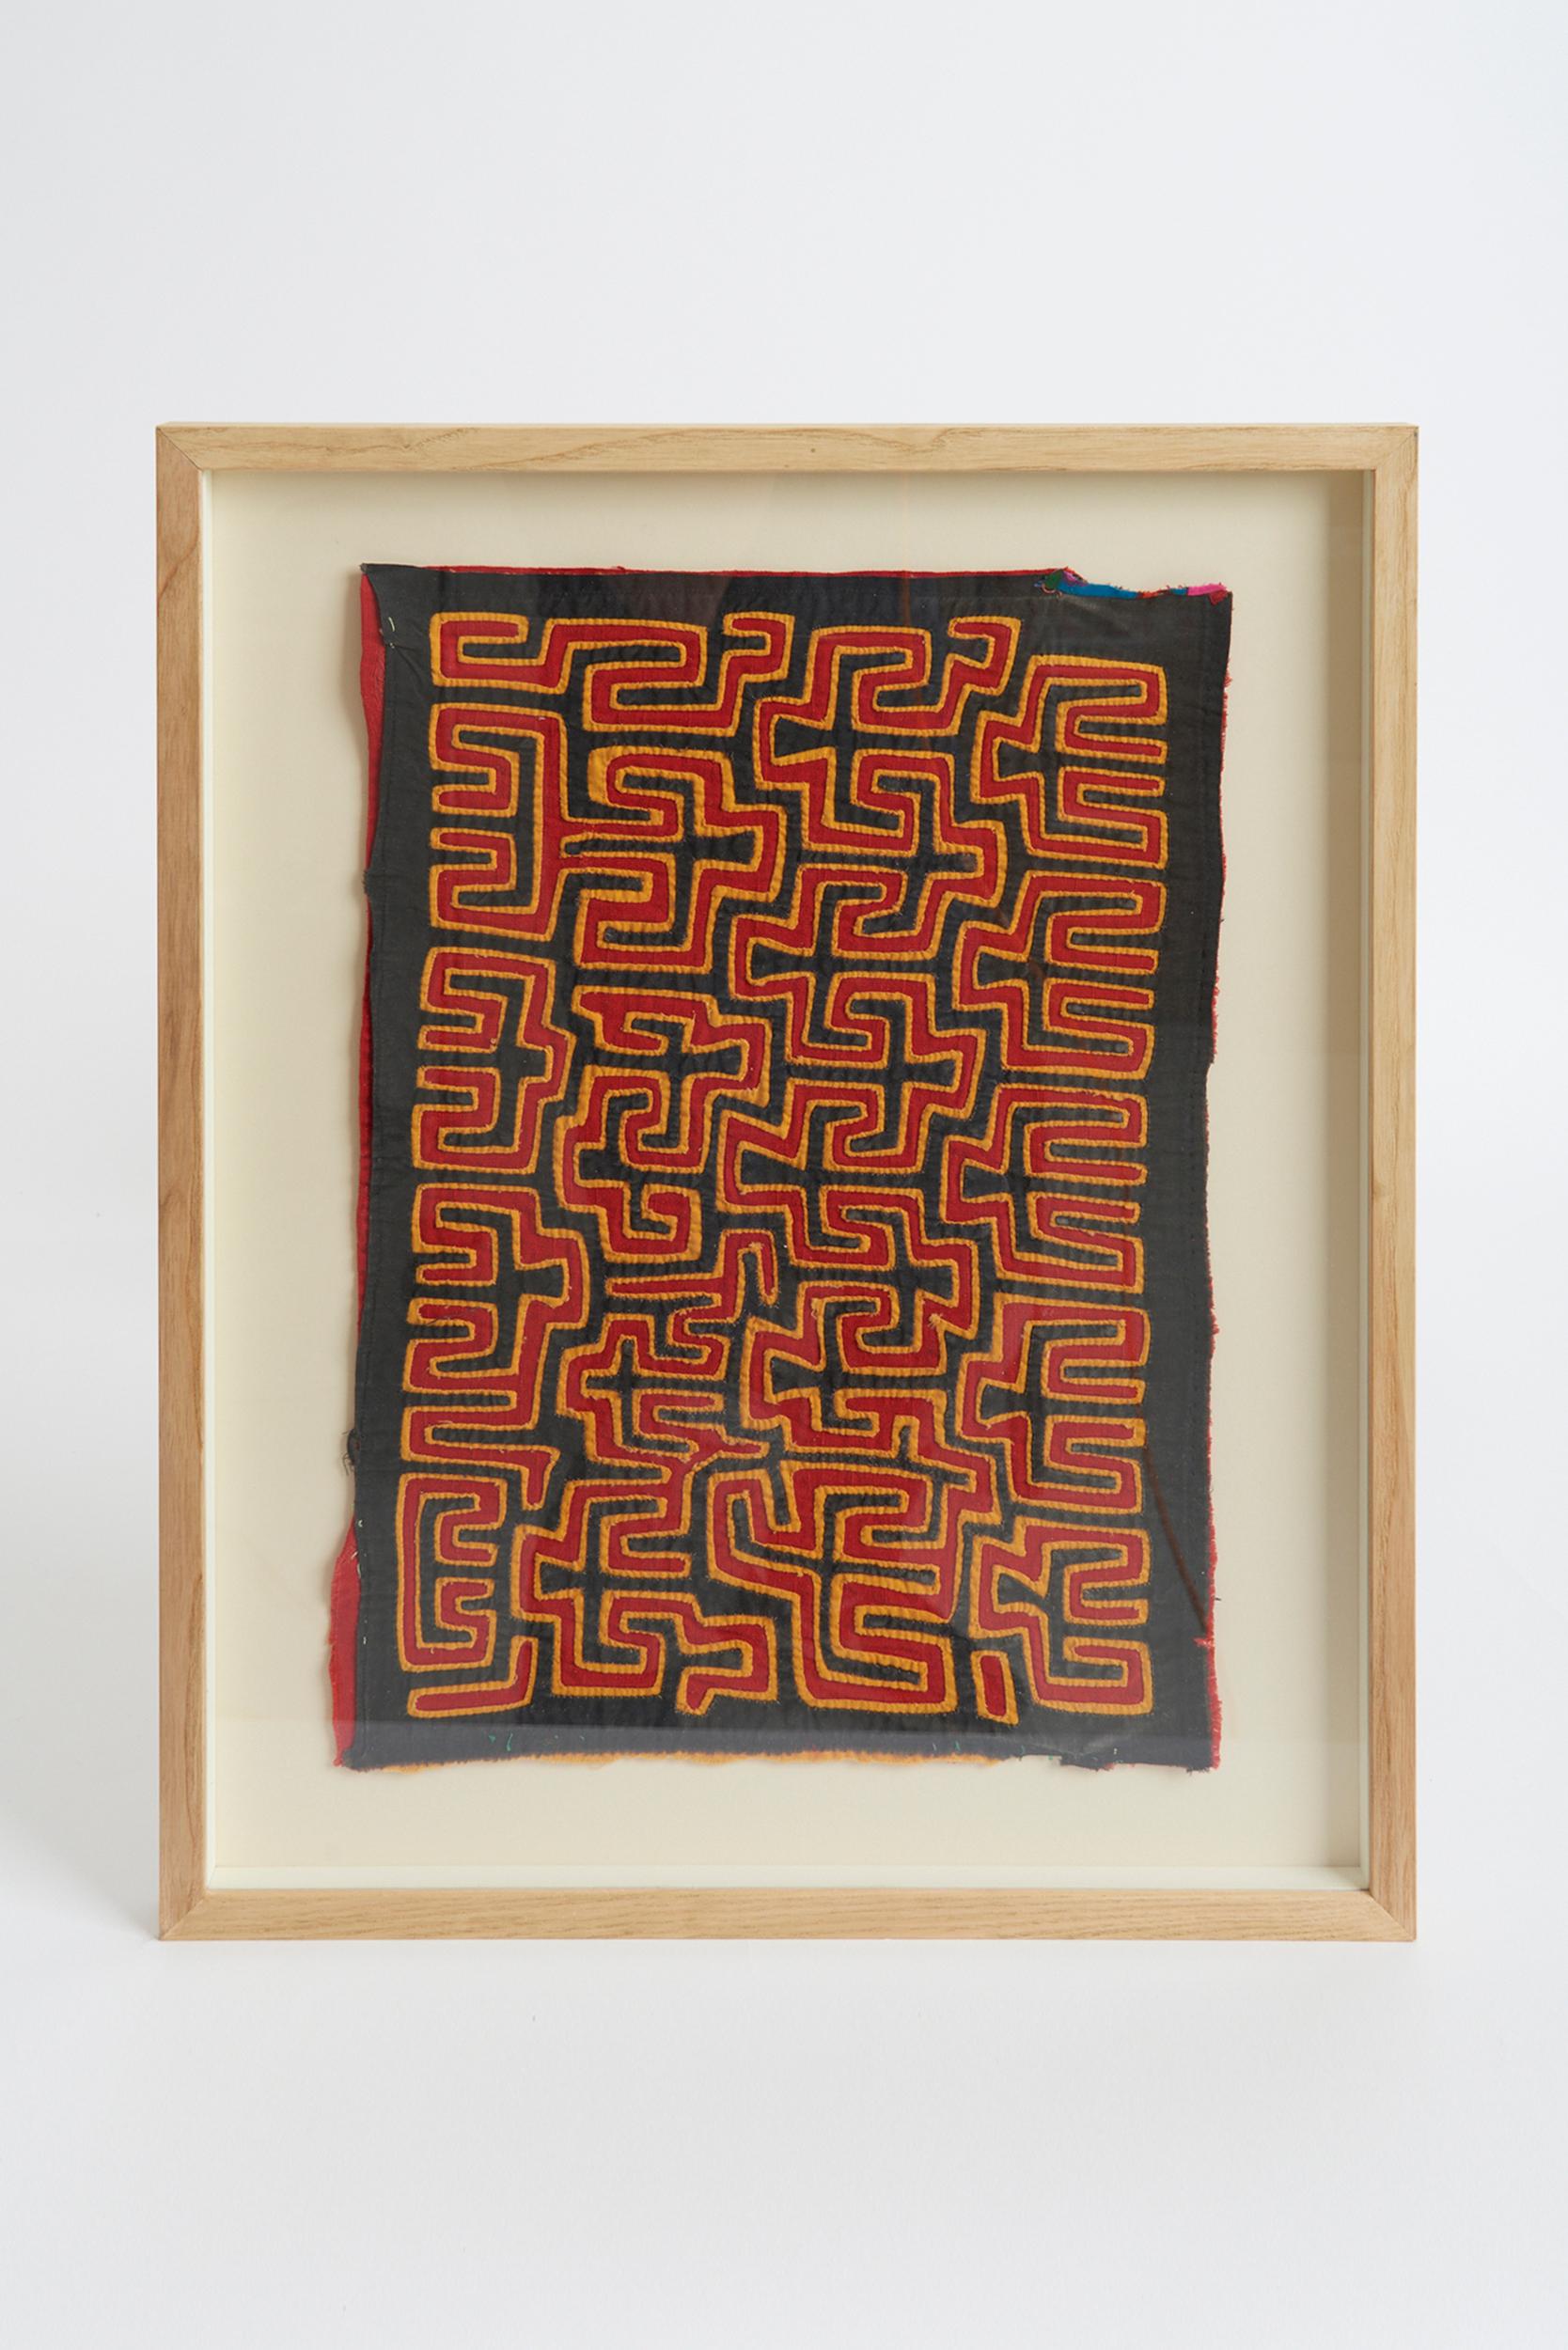 A framed Mola textile.
Traditional clothing of the indigenous Guna people from Panamá and Colombia.
South America, 1960s.
52.5 cm high by 42 cm wide by 2.5 cm depth